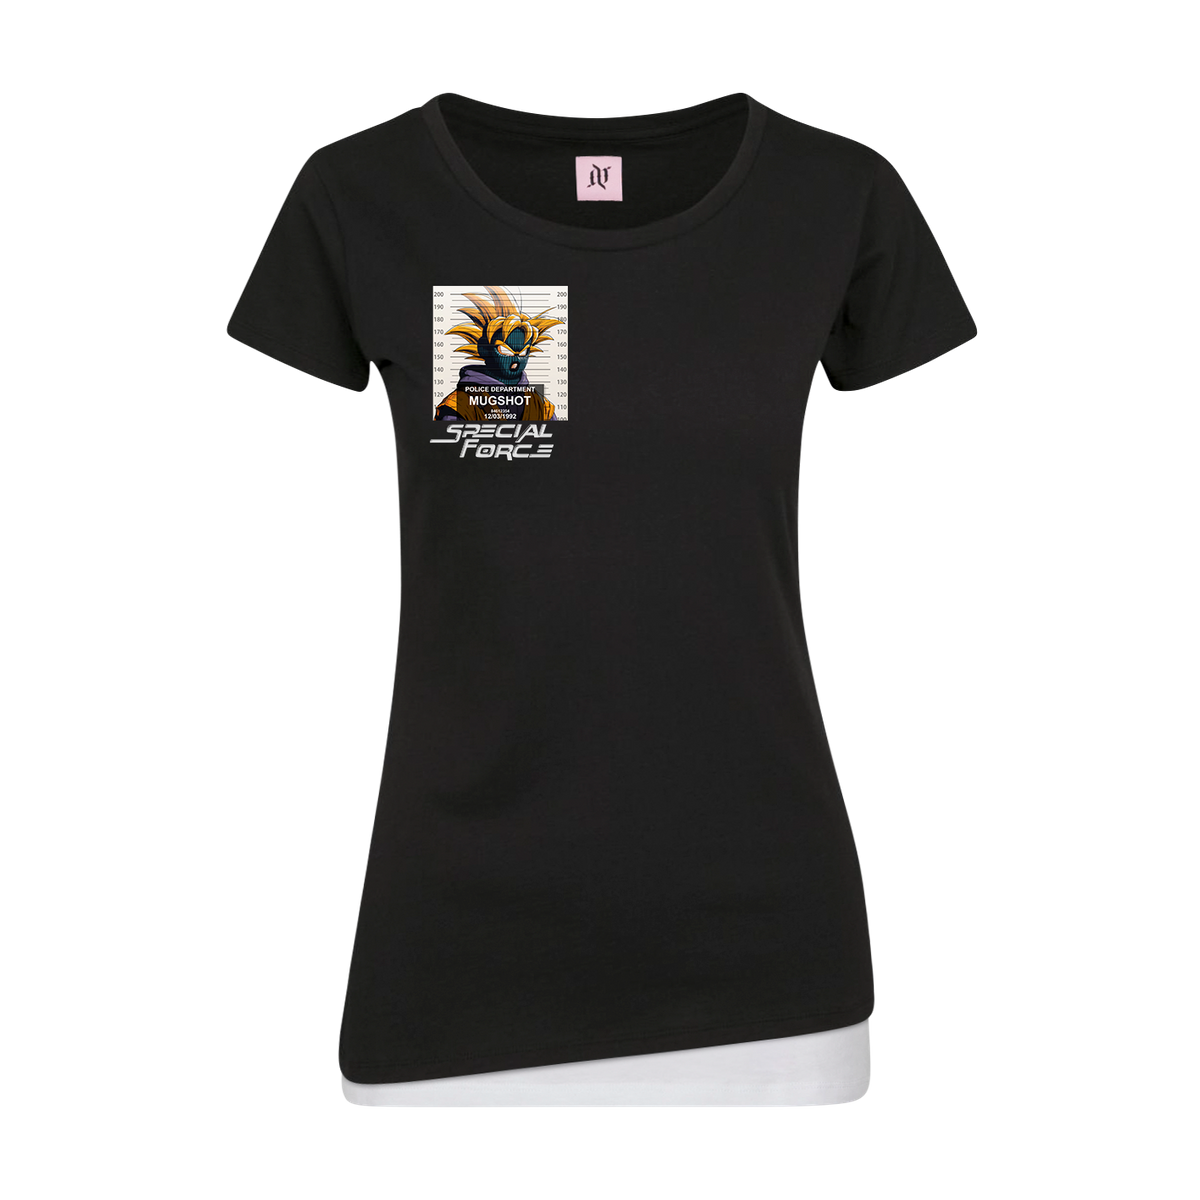 Special Force - Girlshirt